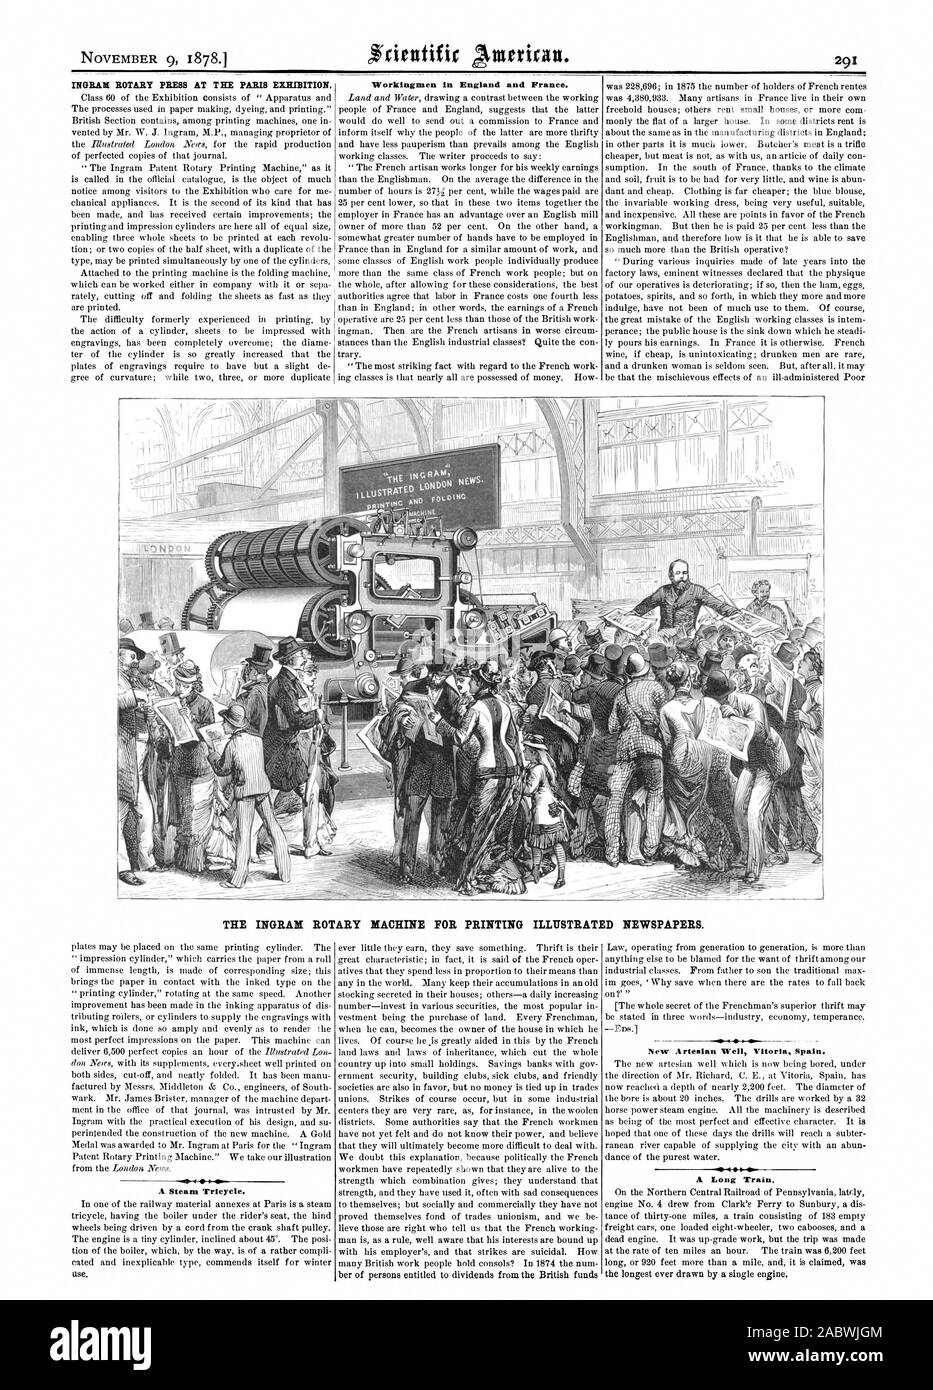 INGRAM ROTARY PRESS AT T BE PARIS EXHIBITION. $rientifir Workingmen in England and France. THE INGRAM ROTARY MACHINE FOR PRINTING ILLUSTRATED NEWSPAPERS. A Steam Tricycle. New Artesian Well Vitoria Spain. A Long Train, scientific american, 1878-11-09 Stock Photo